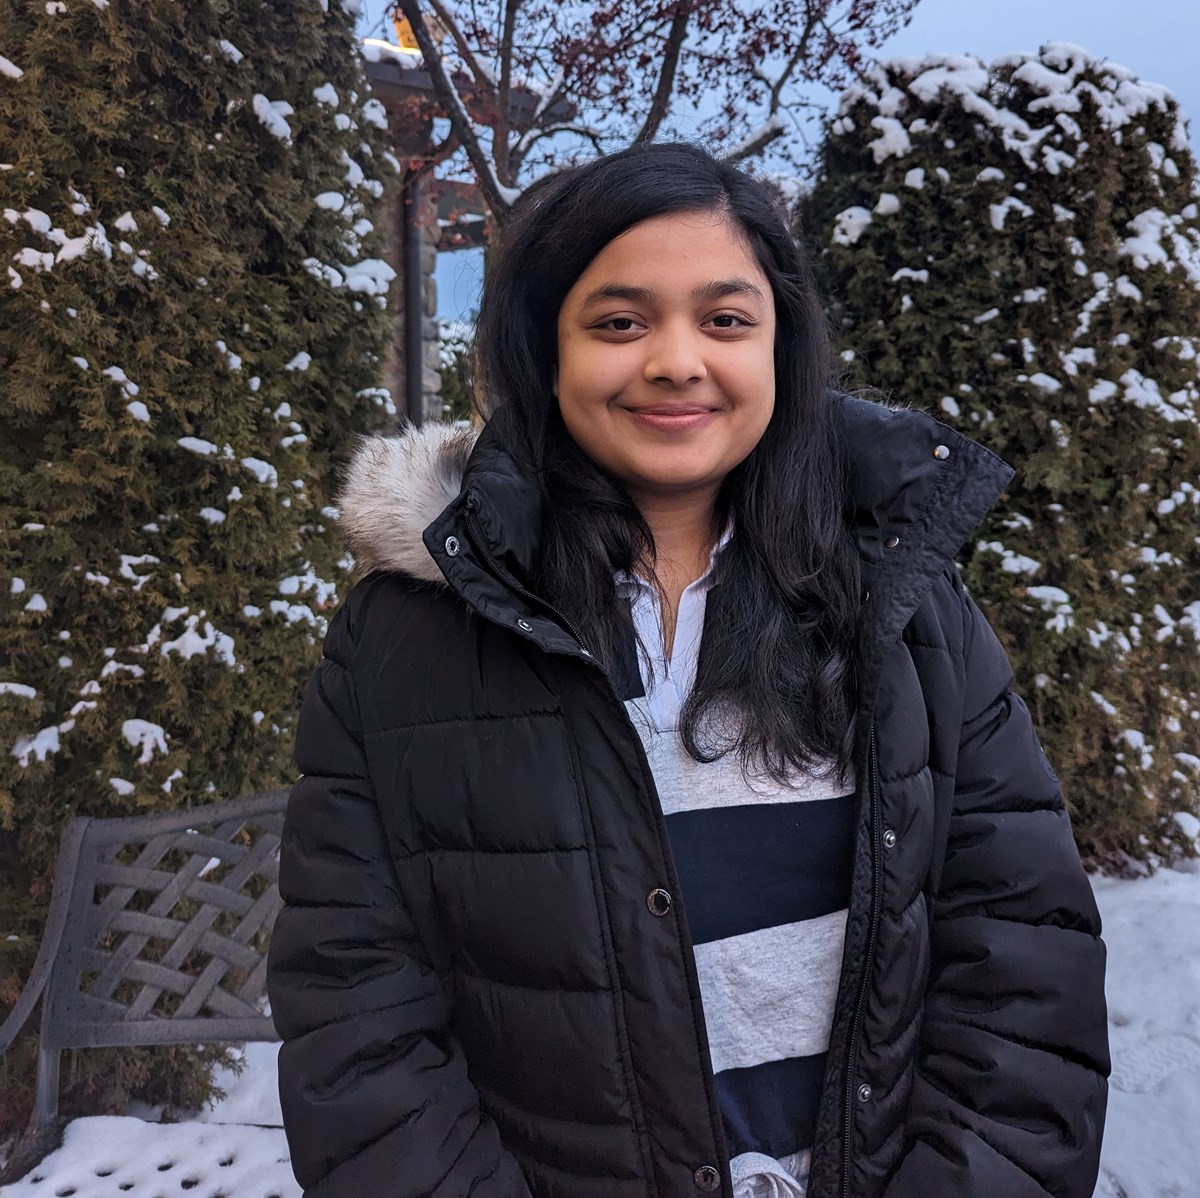 Swarnima Dalal outside in front of a snowy tree smiling at the camera.